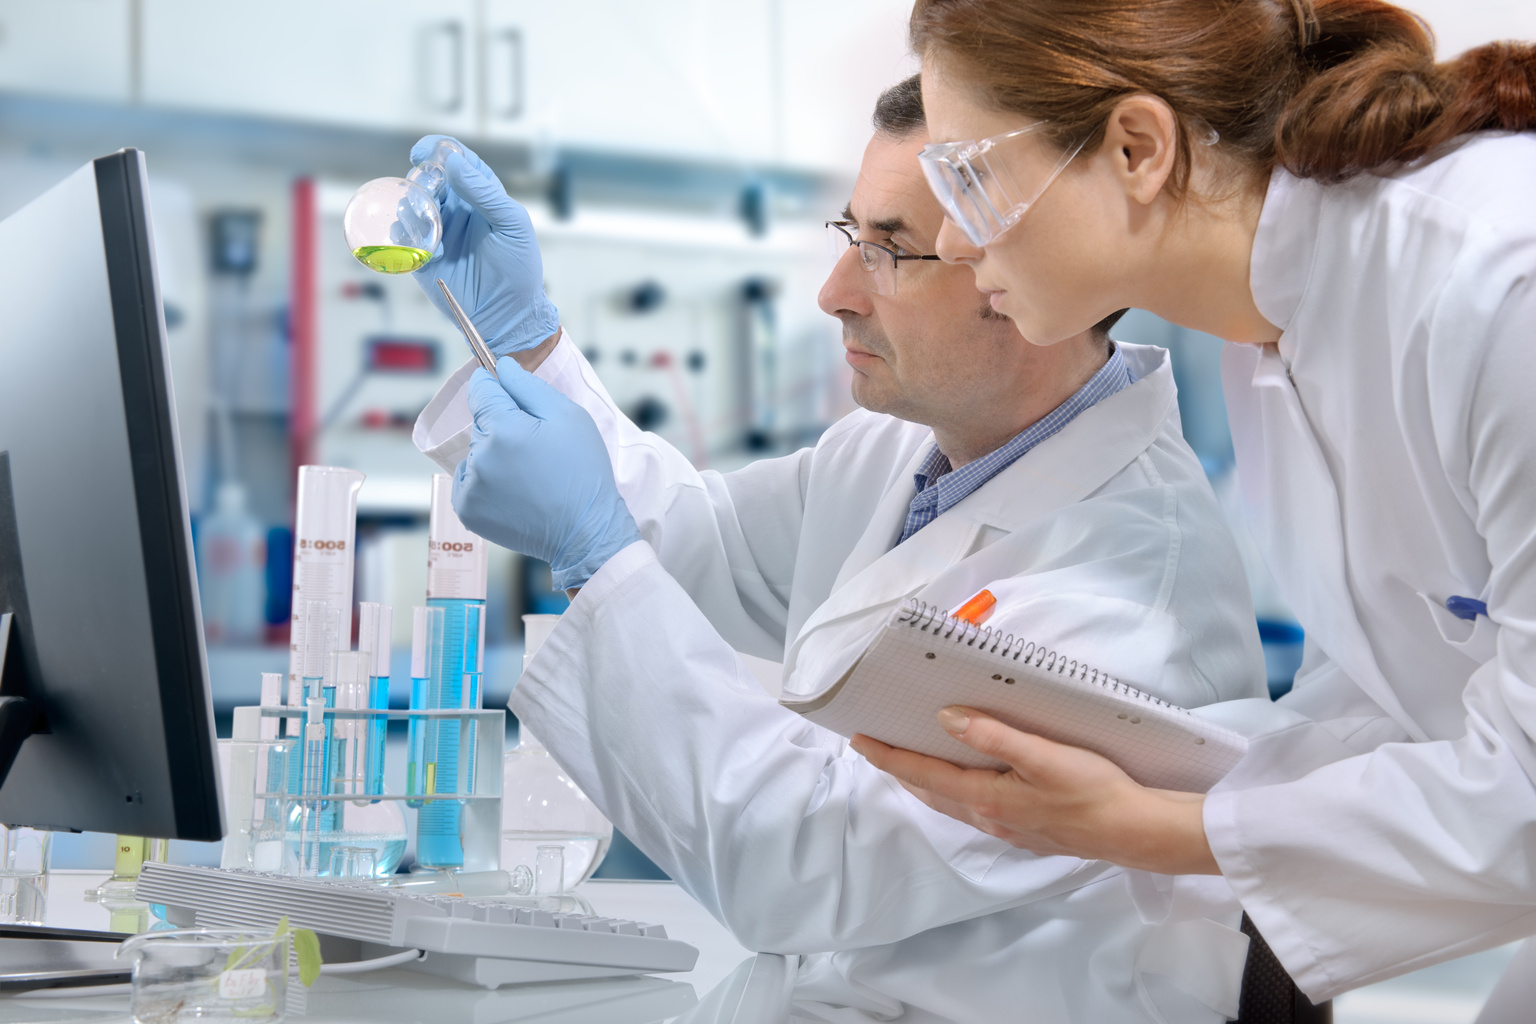 Two healthcare professionals conducting research in a lab